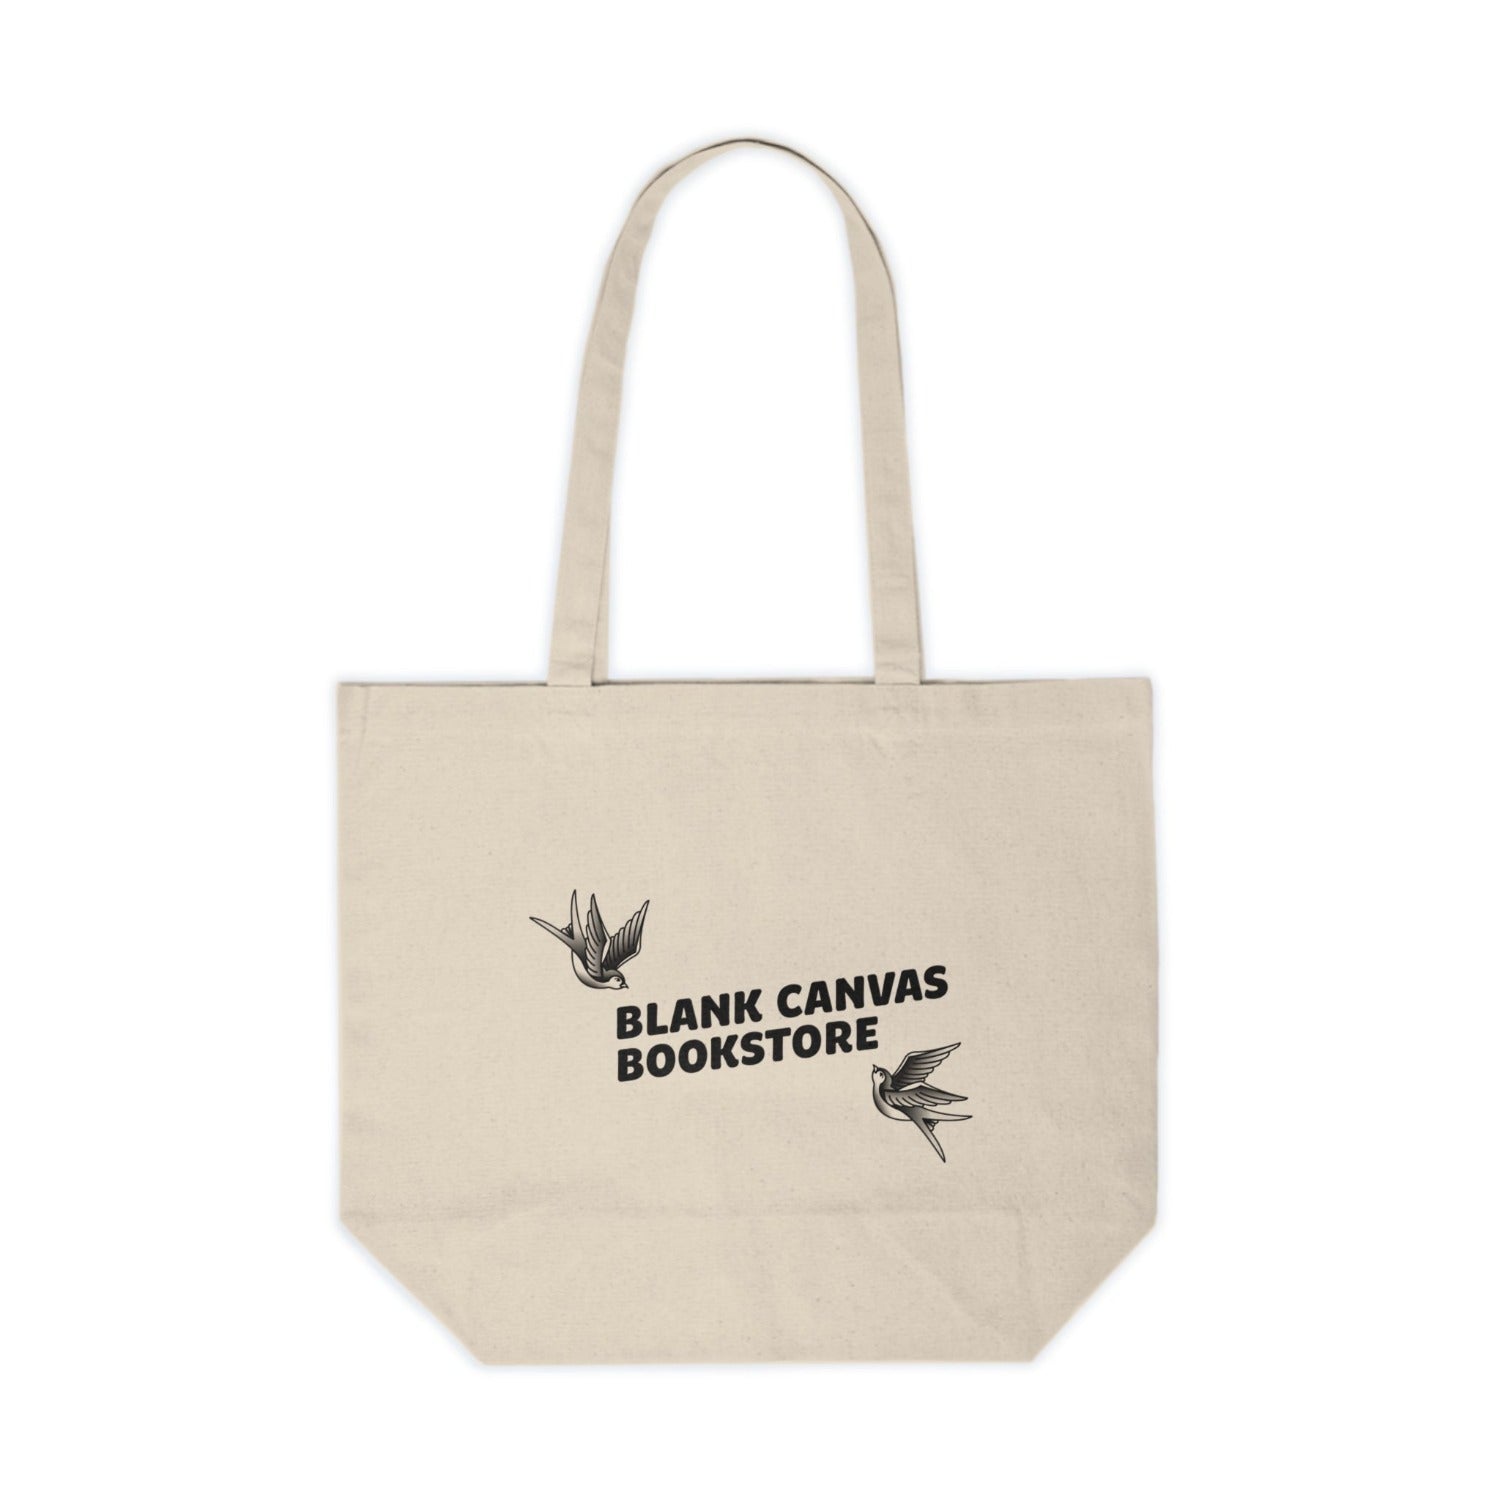 Blank Canvas Bookstore tote bag